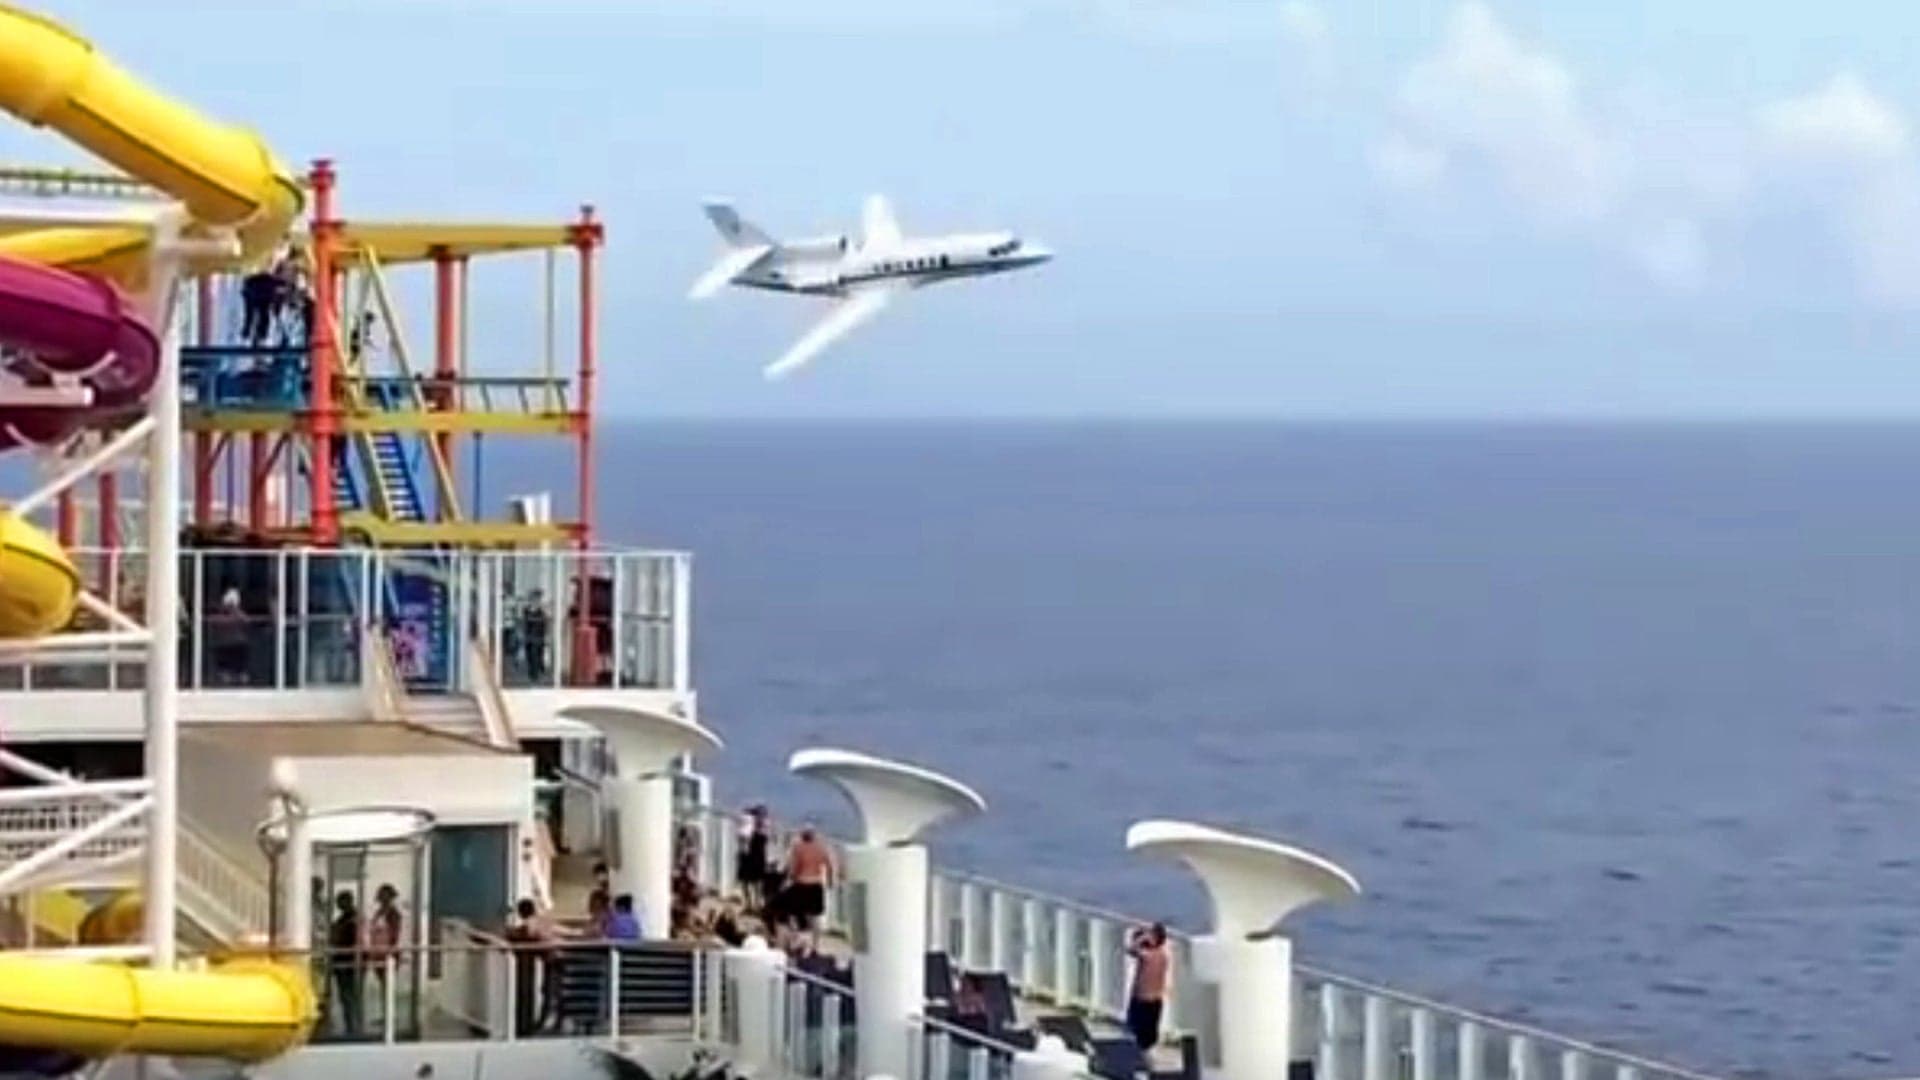 People Are Freaking Out Over This Maritime Patrol Jet’s Low Pass Near A Cruise Ship